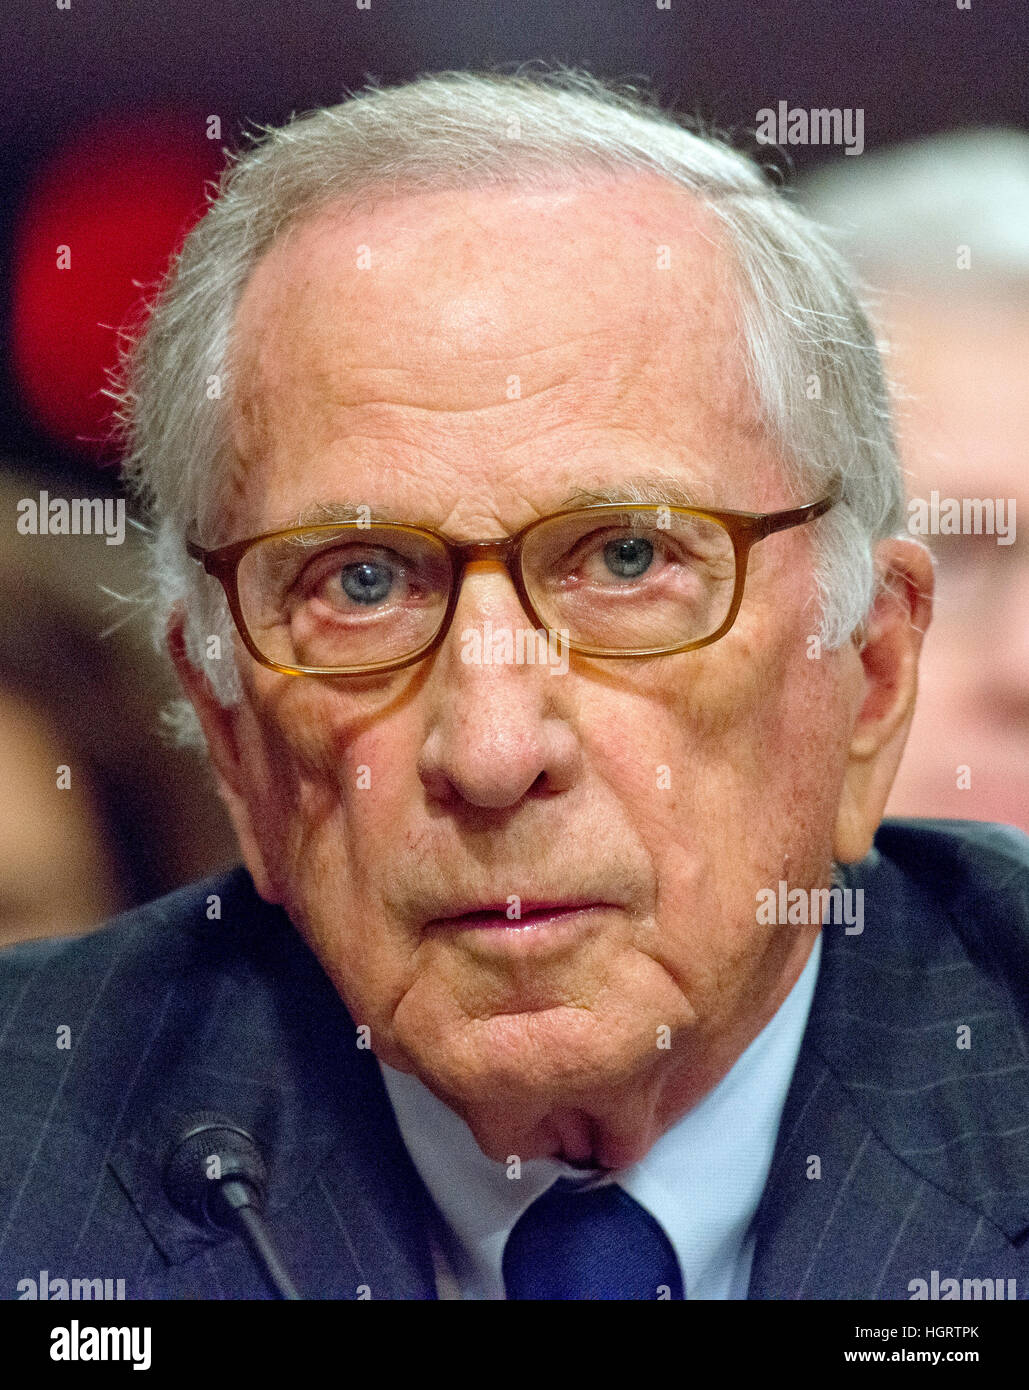 Washington DC, USA. 12th January 2017. Former United States Senator Sam Nunn (Democrat of Georgia) appears before the United States Senate Committee on Armed Services as it holds a confirmation hearing on the nomination of US Marine Corps General James N. Mattis (retired) to be Secretary of Defense on Capitol Hill in Washington, DC on Thursday, January 12, 2017. Nunn introduced and endorsed Mattis for the post. Credit: MediaPunch Inc/Alamy Live News Stock Photo